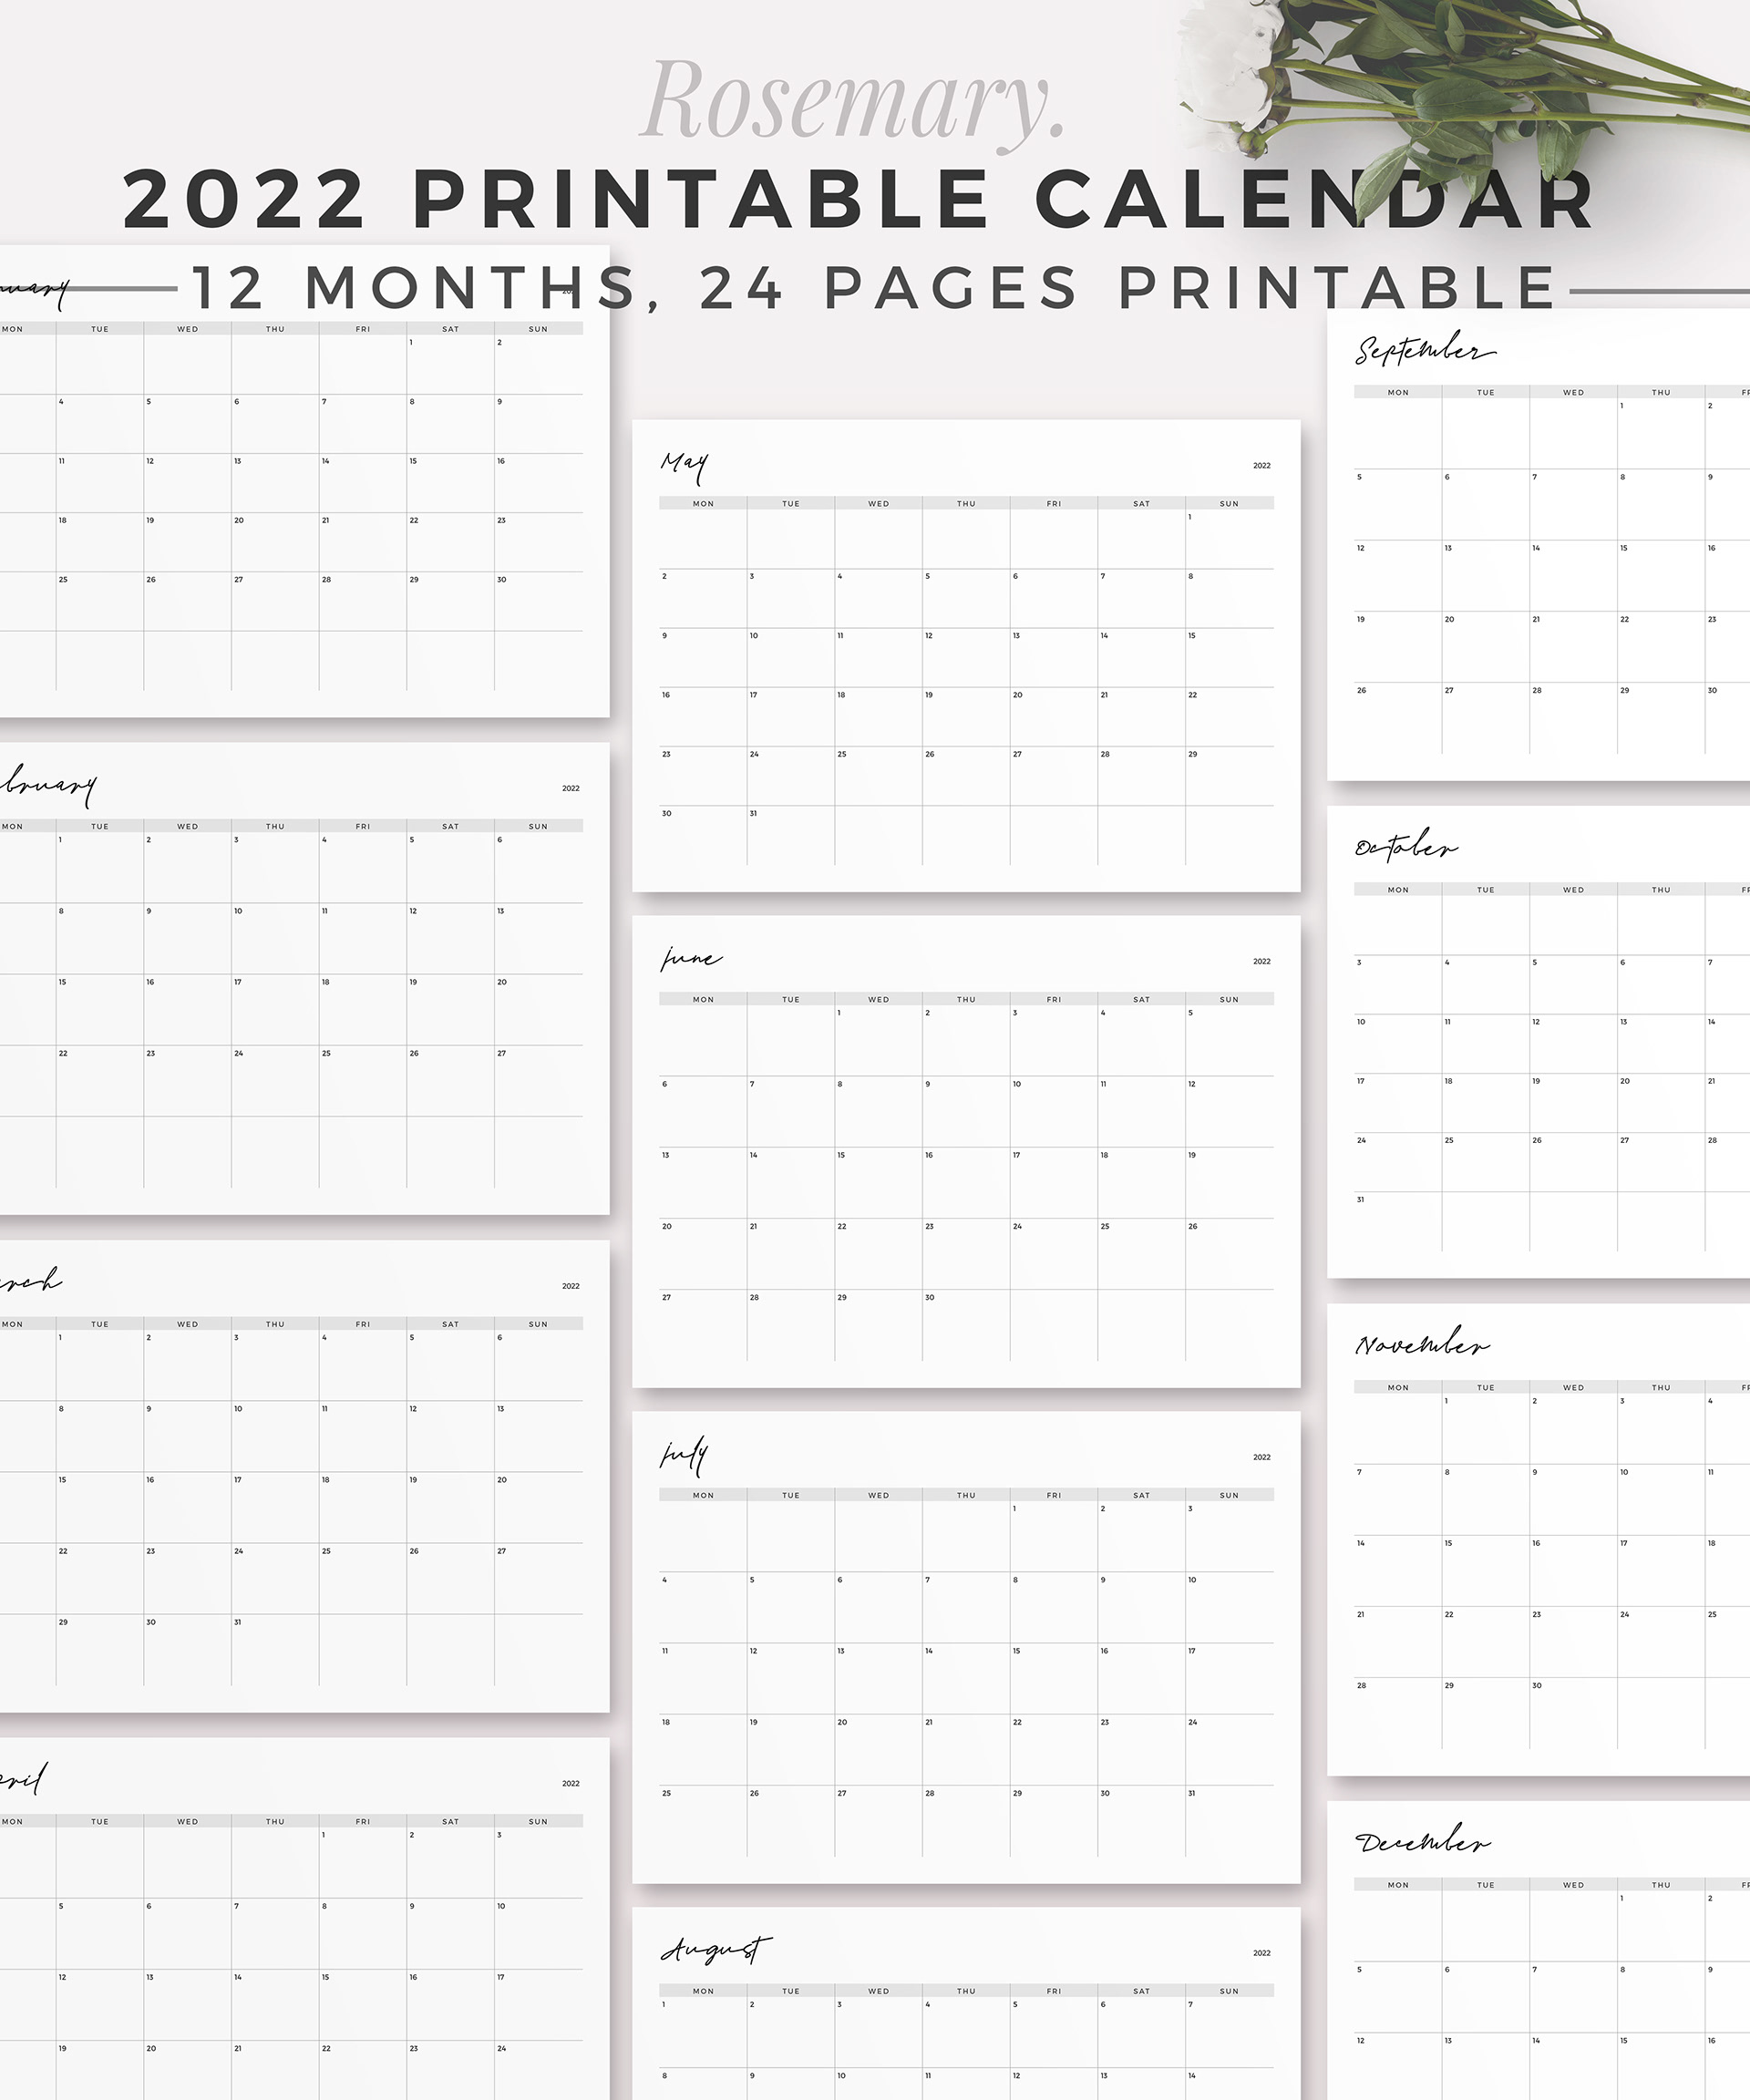 Paperly Planners - Beautiful, Productive. - 2022 ROSEMARY Calendar